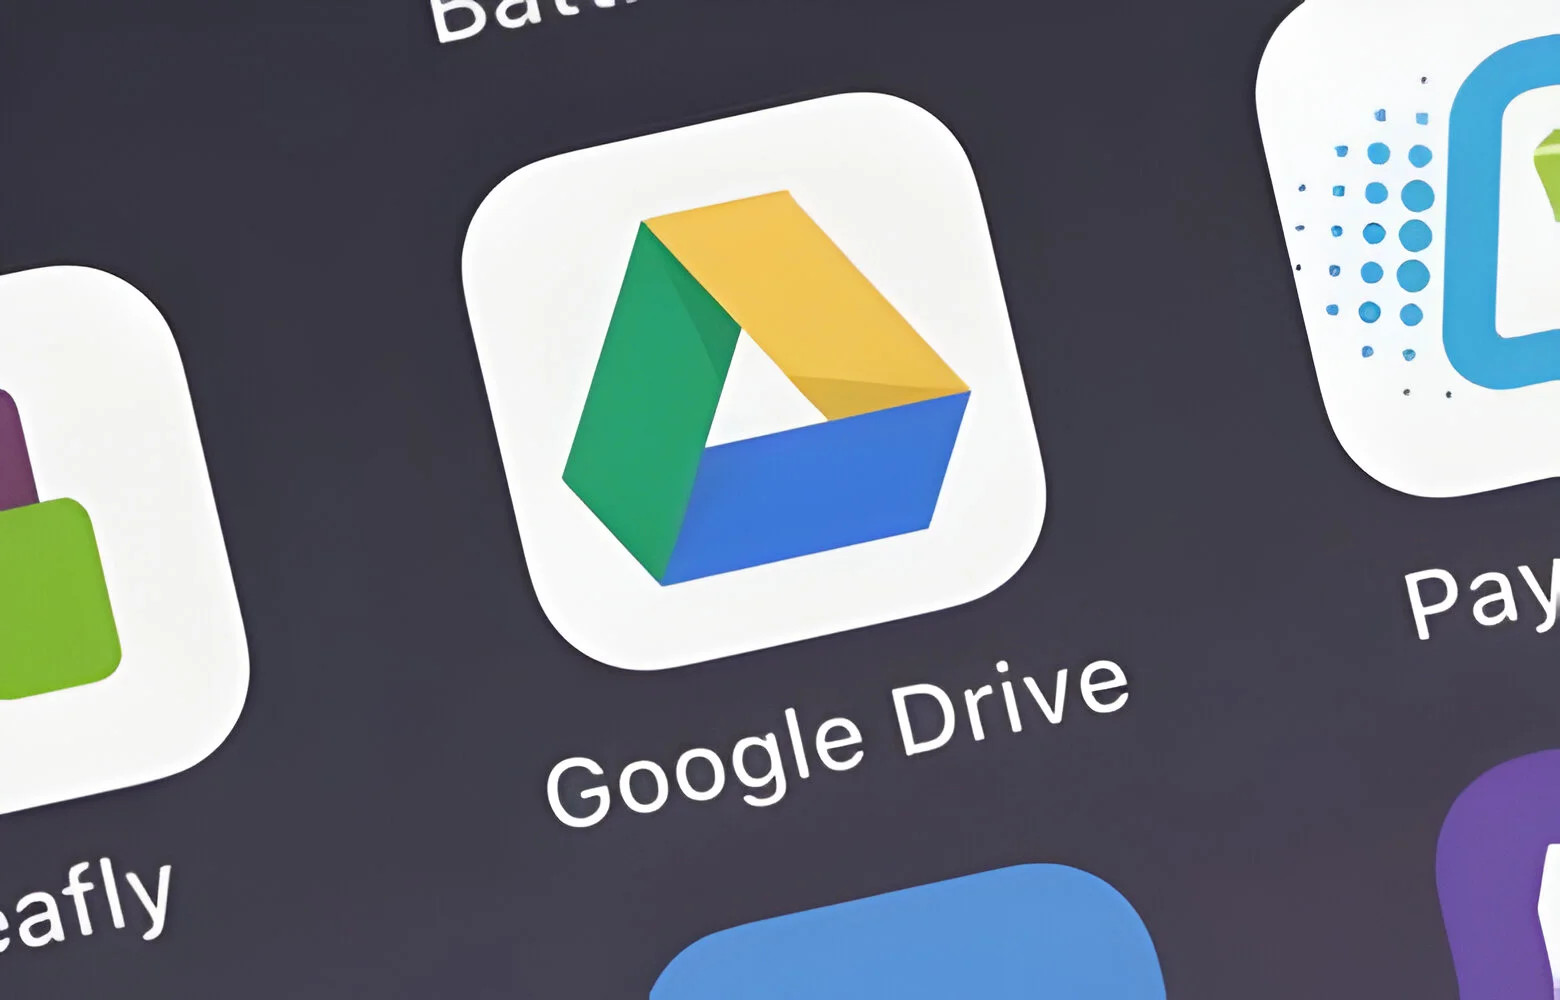 The-Future-of-File-Storage-Exploring-Google-Drives-Latest-Features-and-Updates-